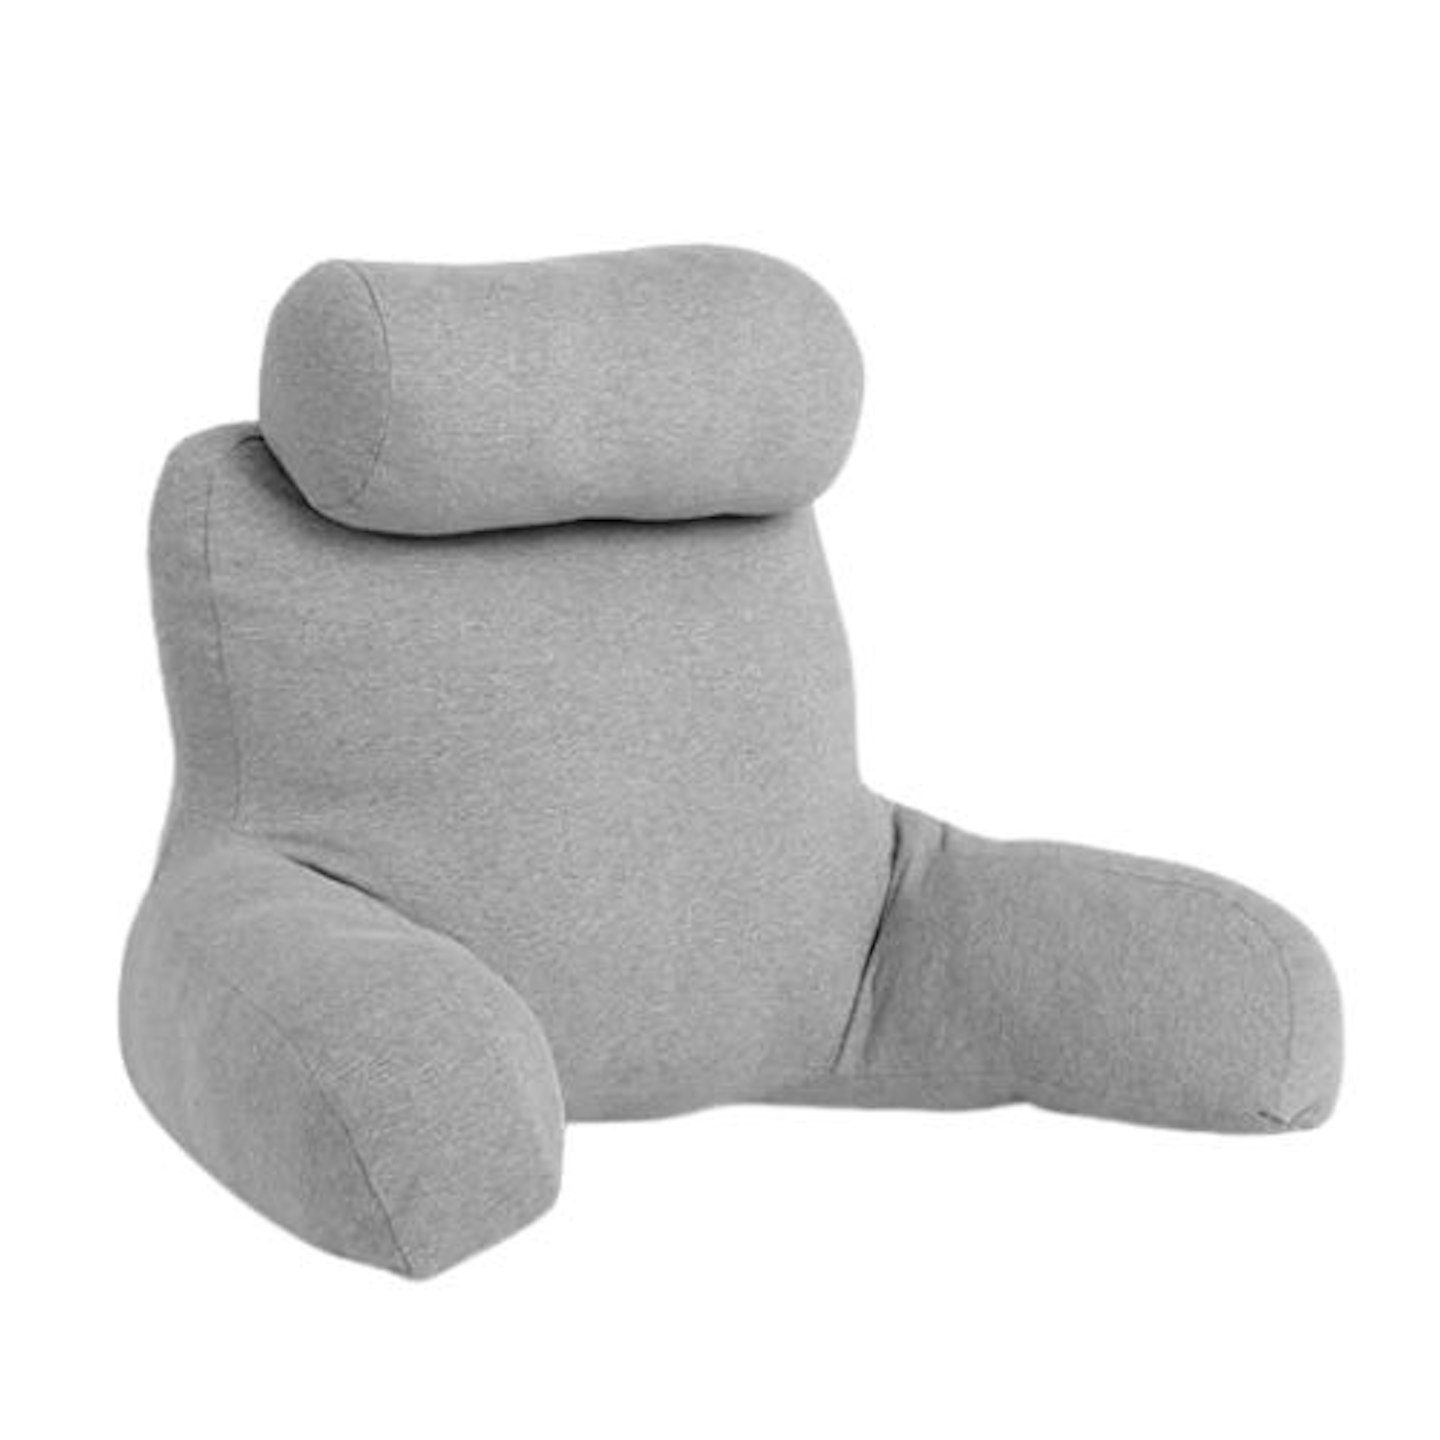 John Lewis Specialist Synthetic Reading Support Pillow